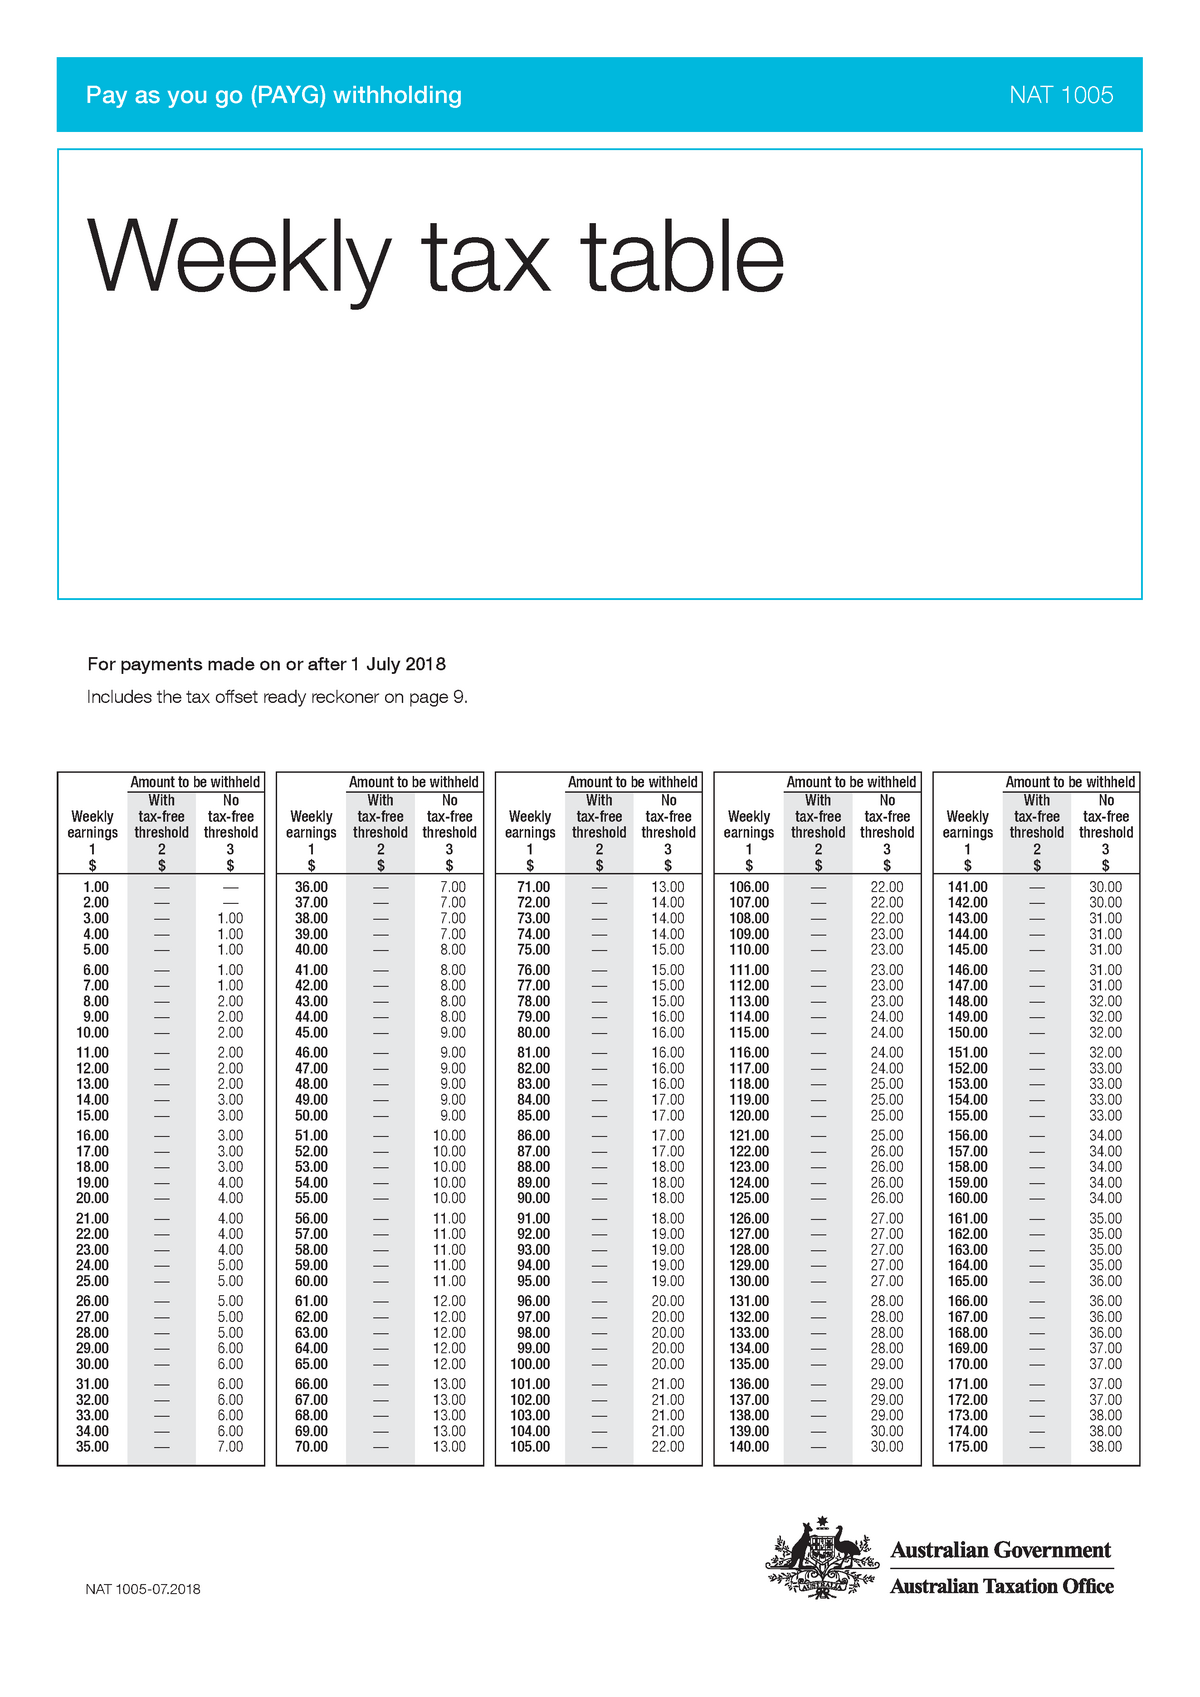 Weekly tax table 2018 19 NAT 1005 Pay as you go (PAYG) withholding